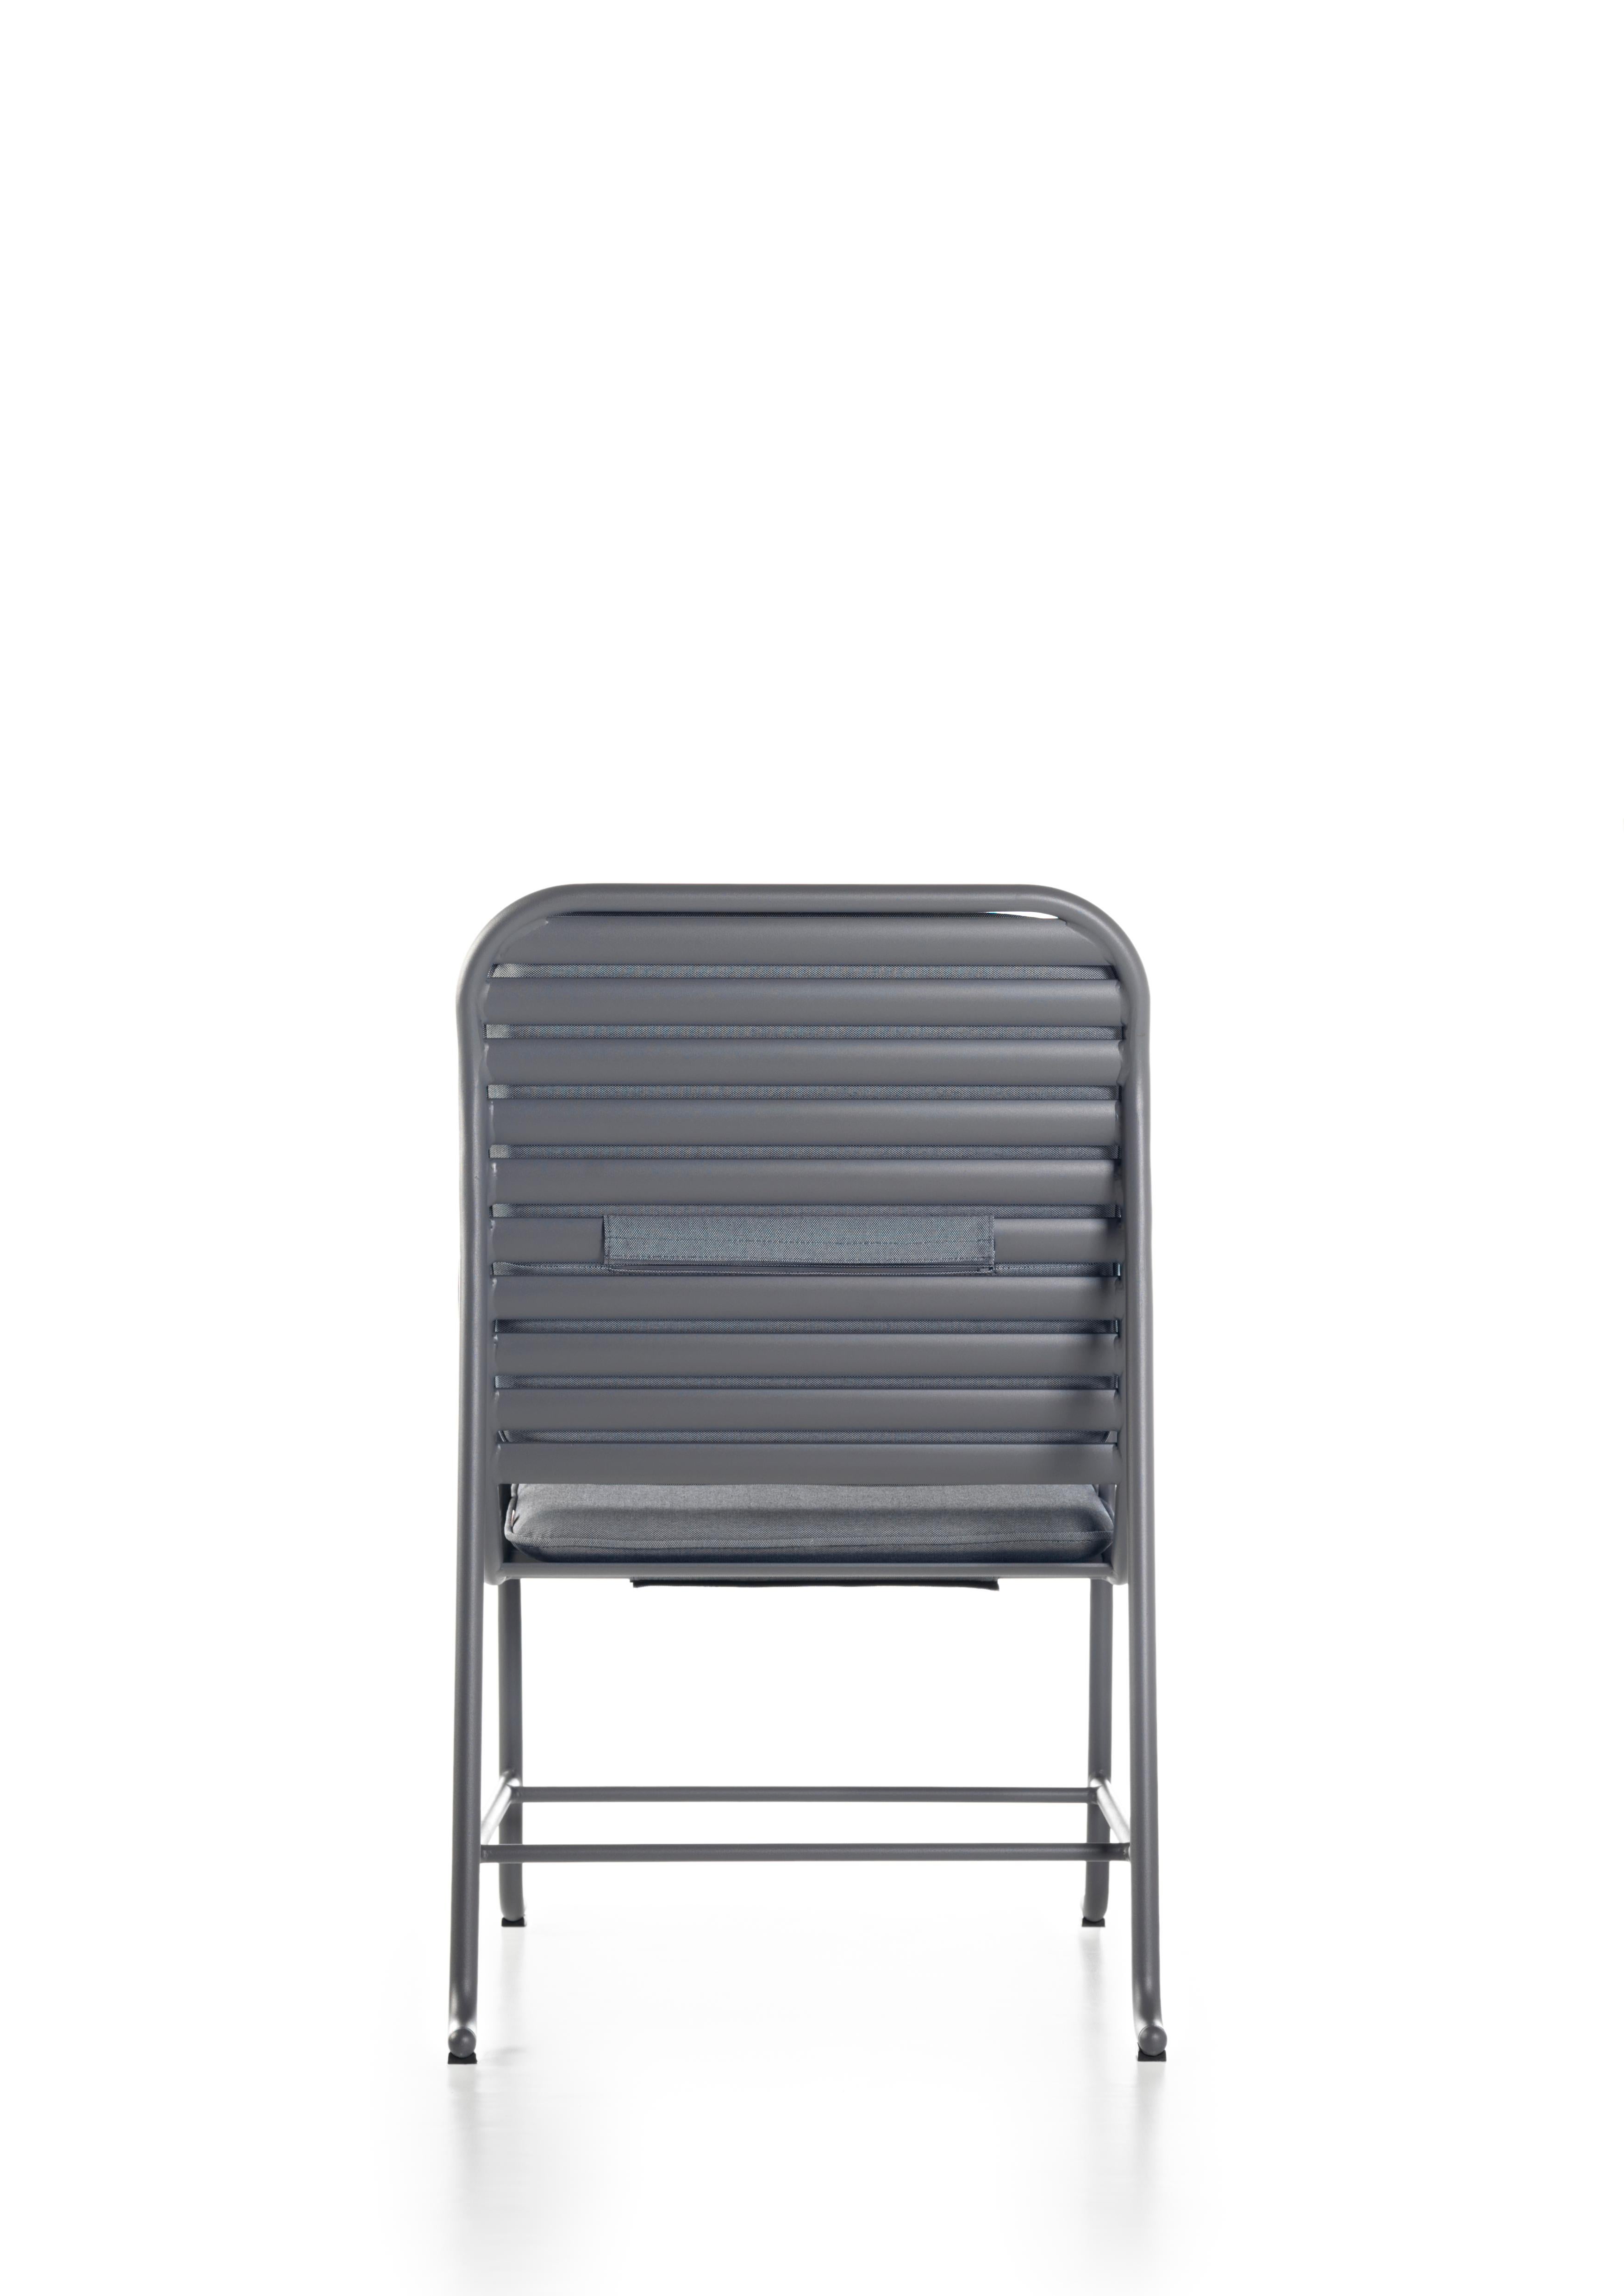 Spanish Outdoor armchair by Jaime Hayon grey powder coated aluminum, grey leather fabric For Sale